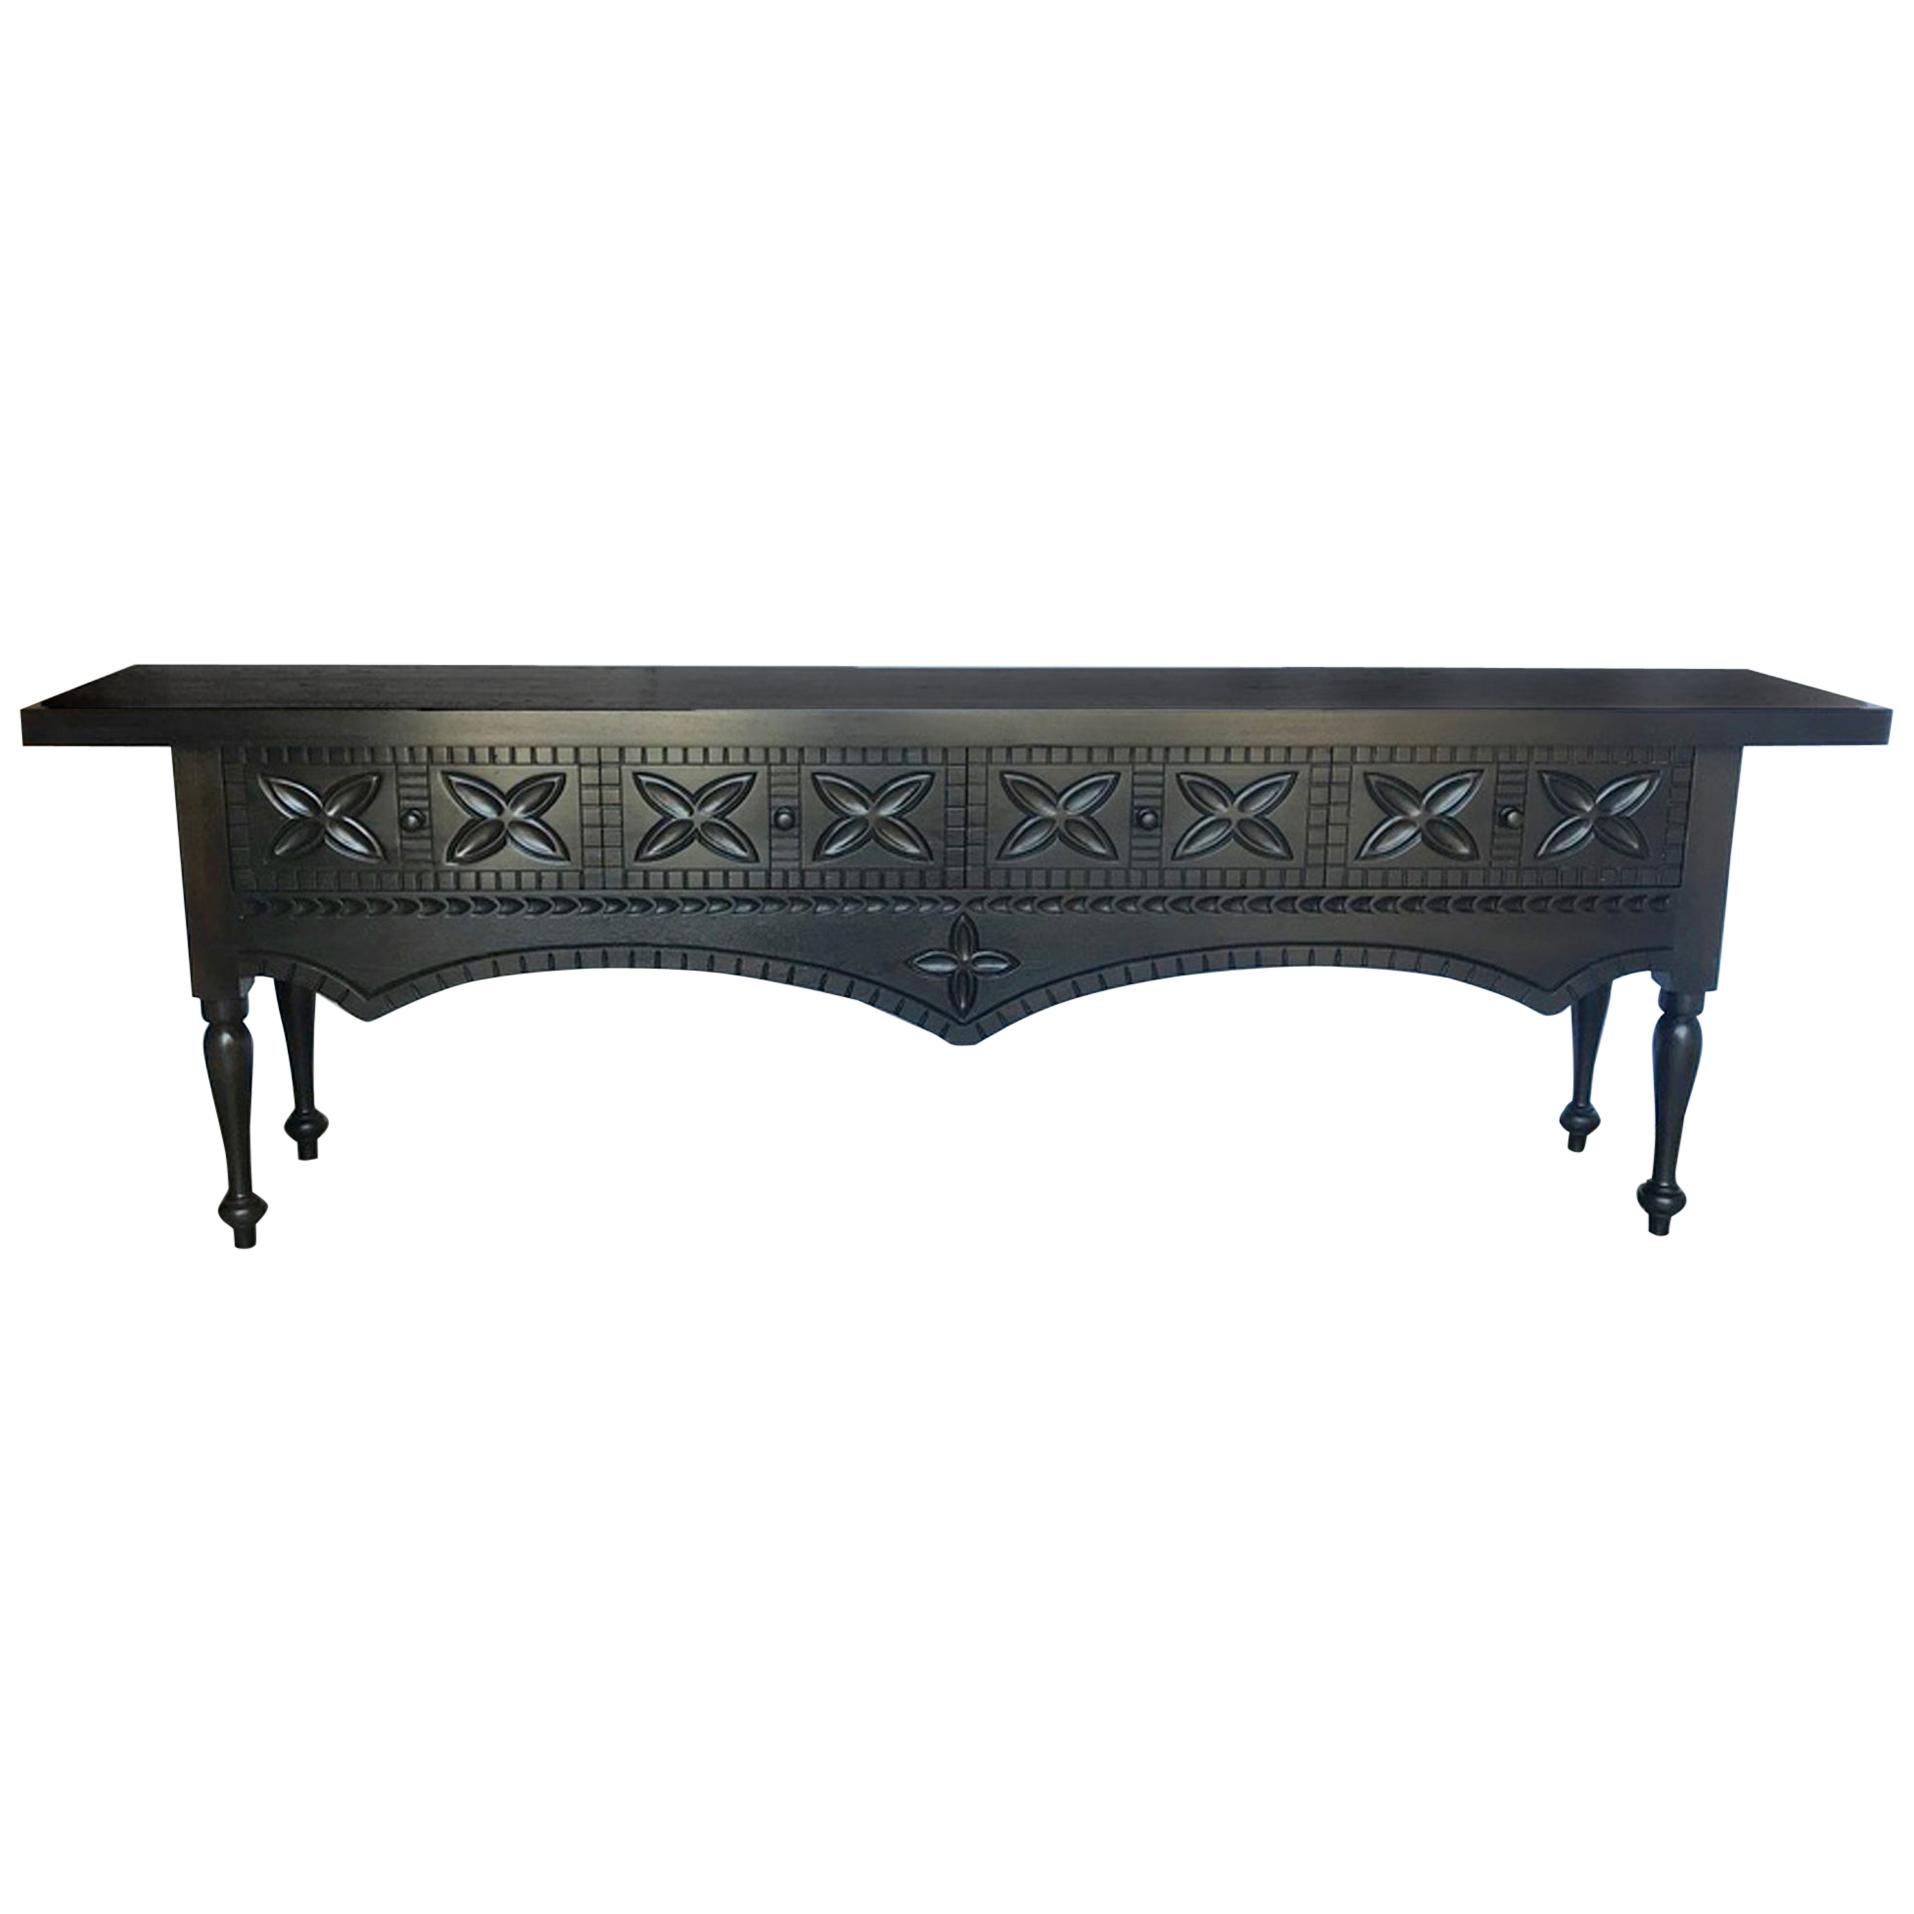 This custom carved Nahuala console is based on indigenous Guatemalan tables. The word Nahual means animal spirit. This particular one has four drawers and was made in Walnut with a closed grab, dark finish, no distress.
This console can be made in